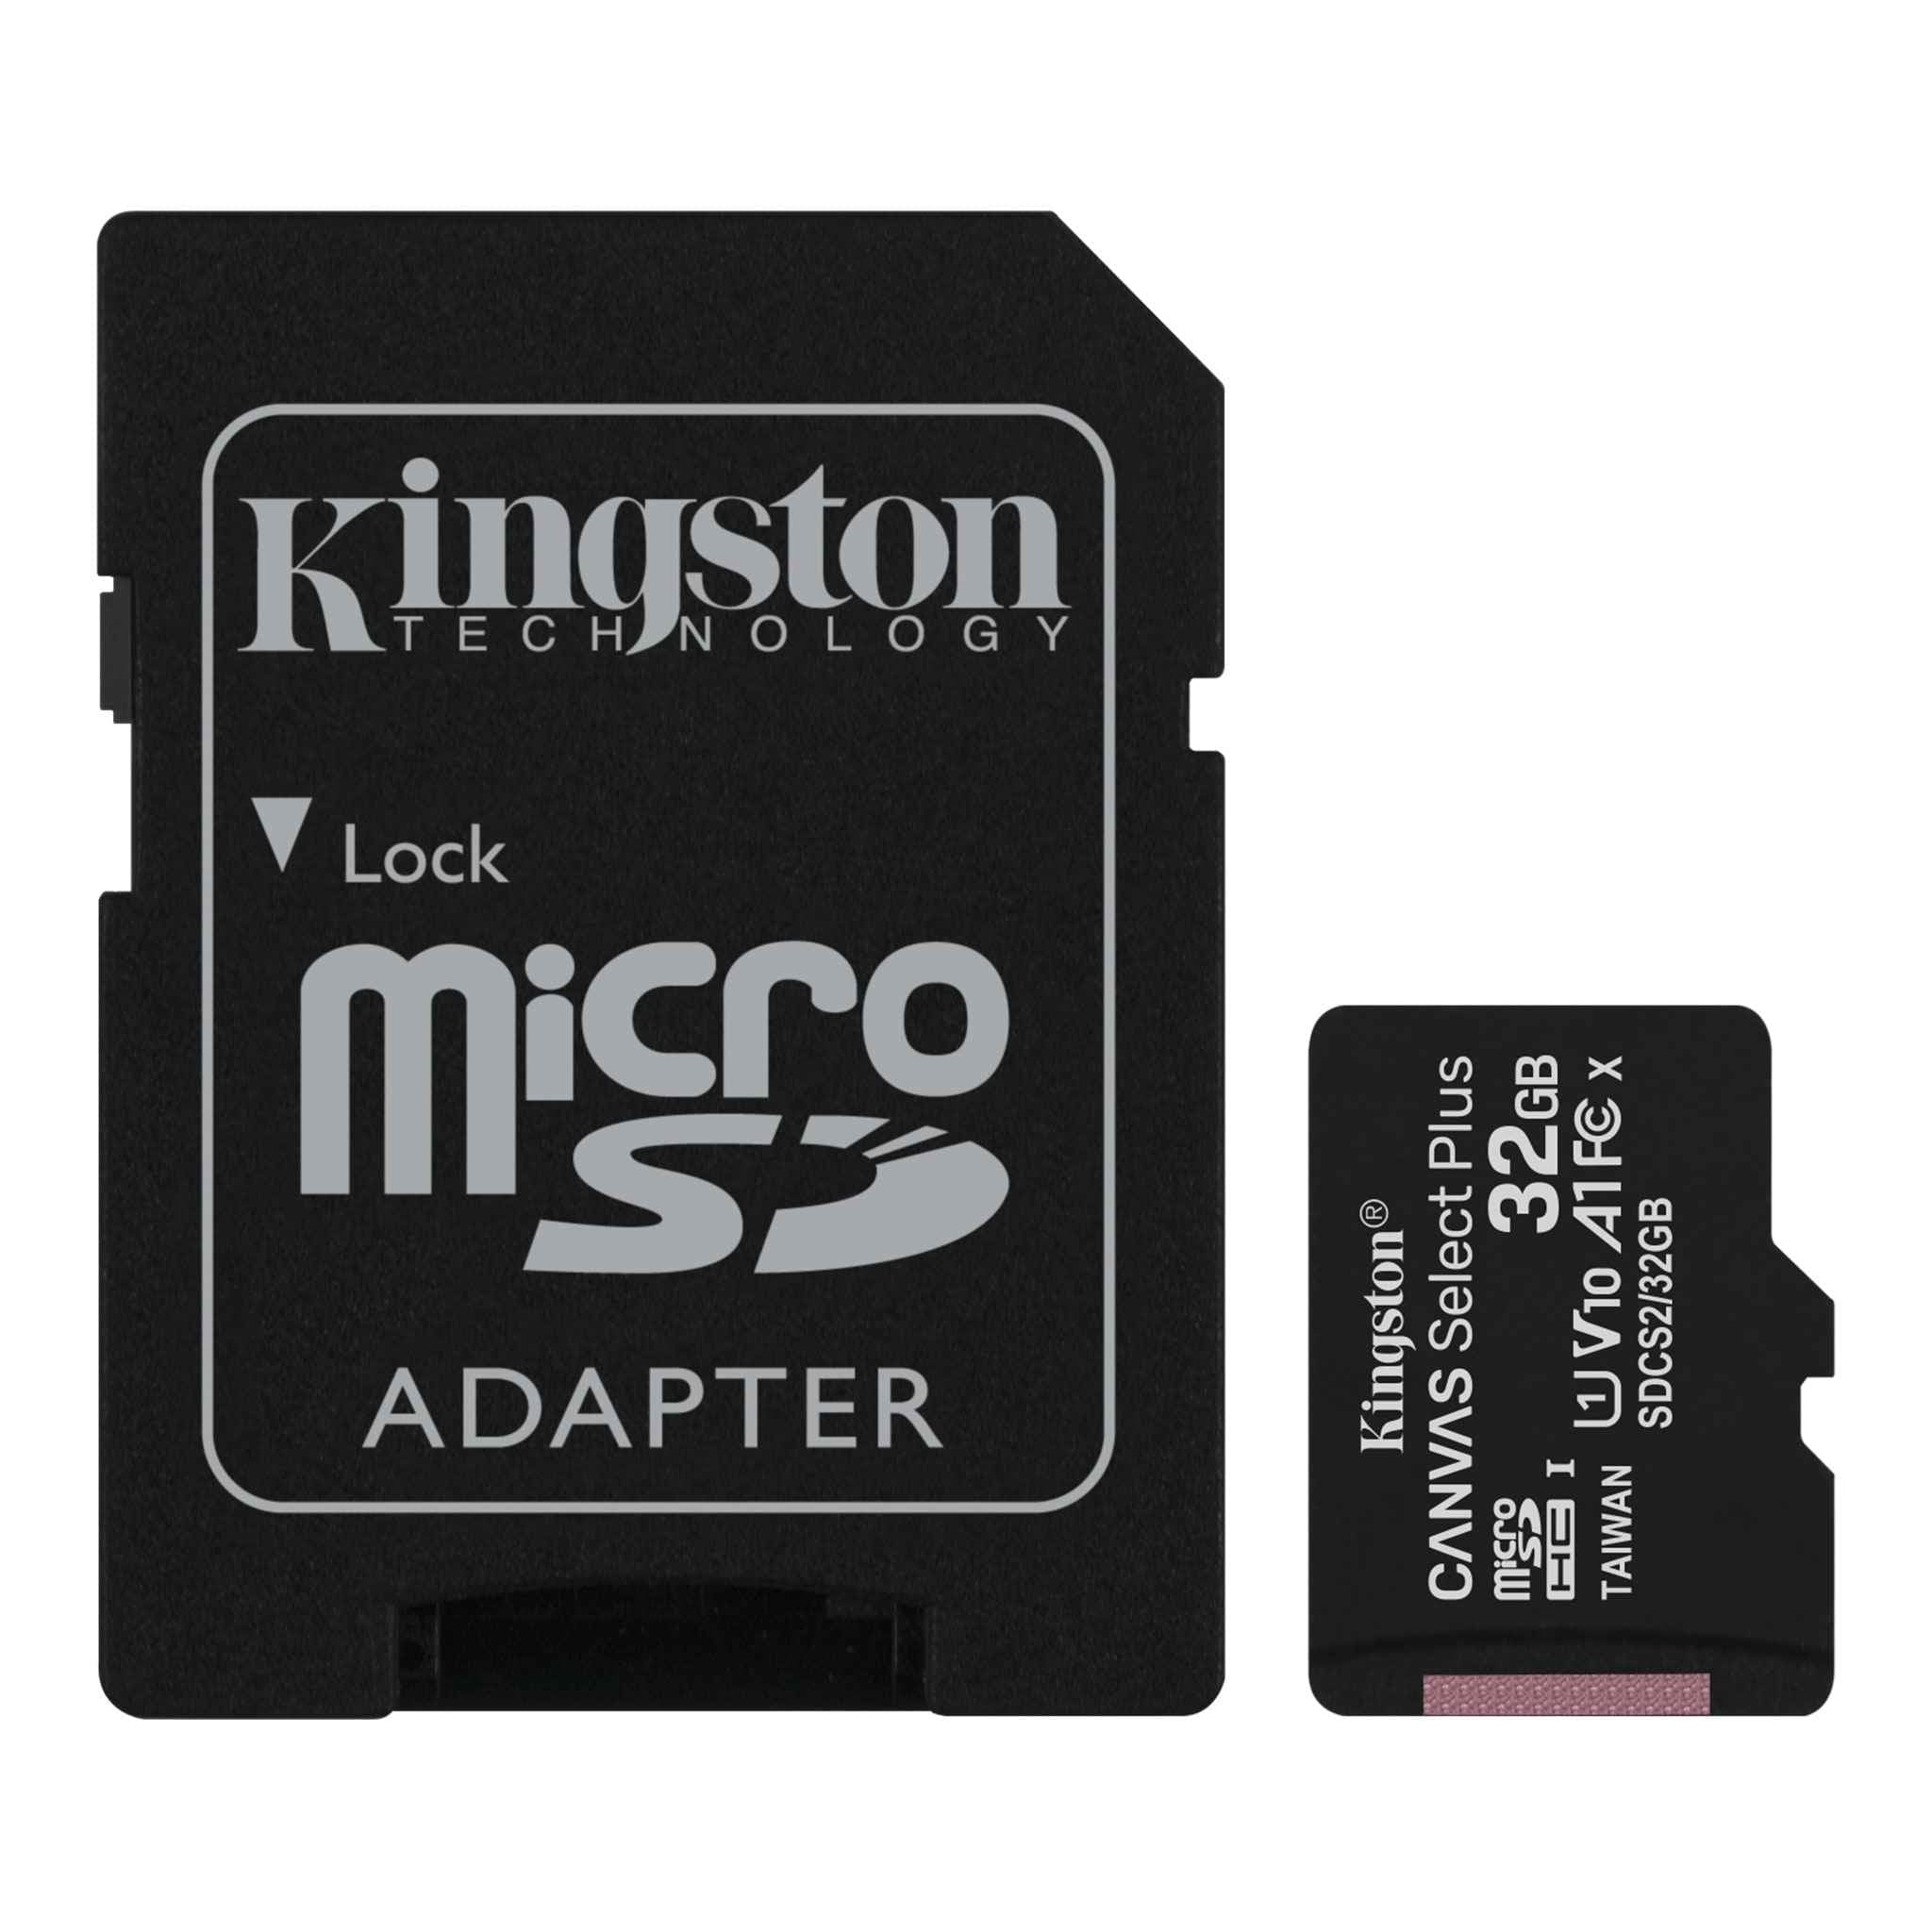 A Guide to Speed Classes for SD and microSD Cards - Kingston Technology